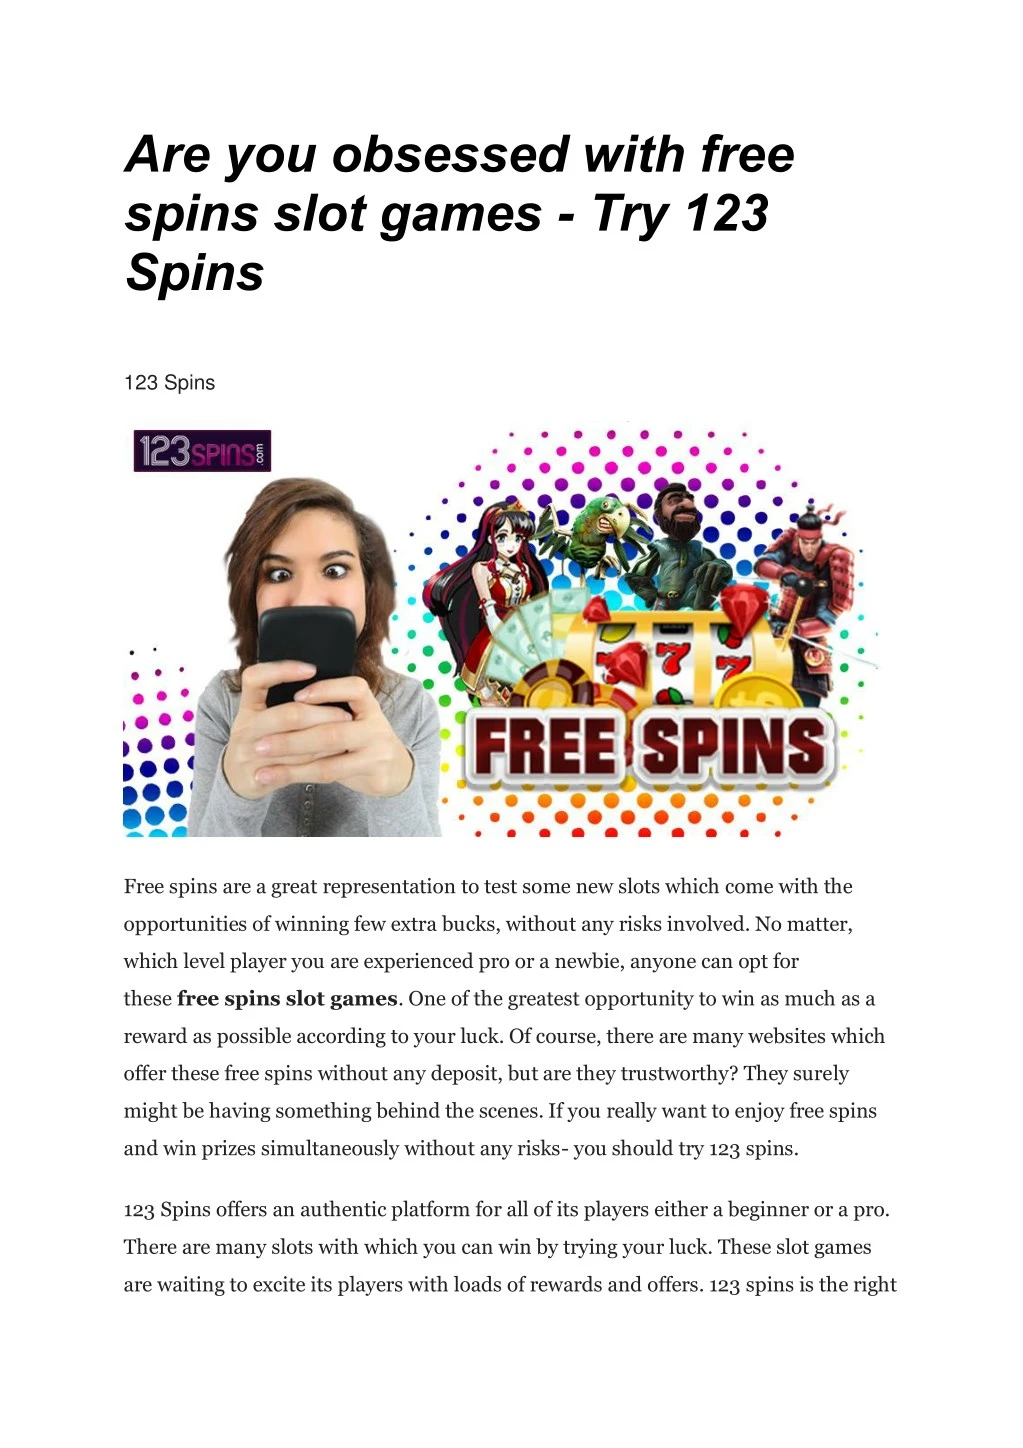 are you obsessed with free spins slot games